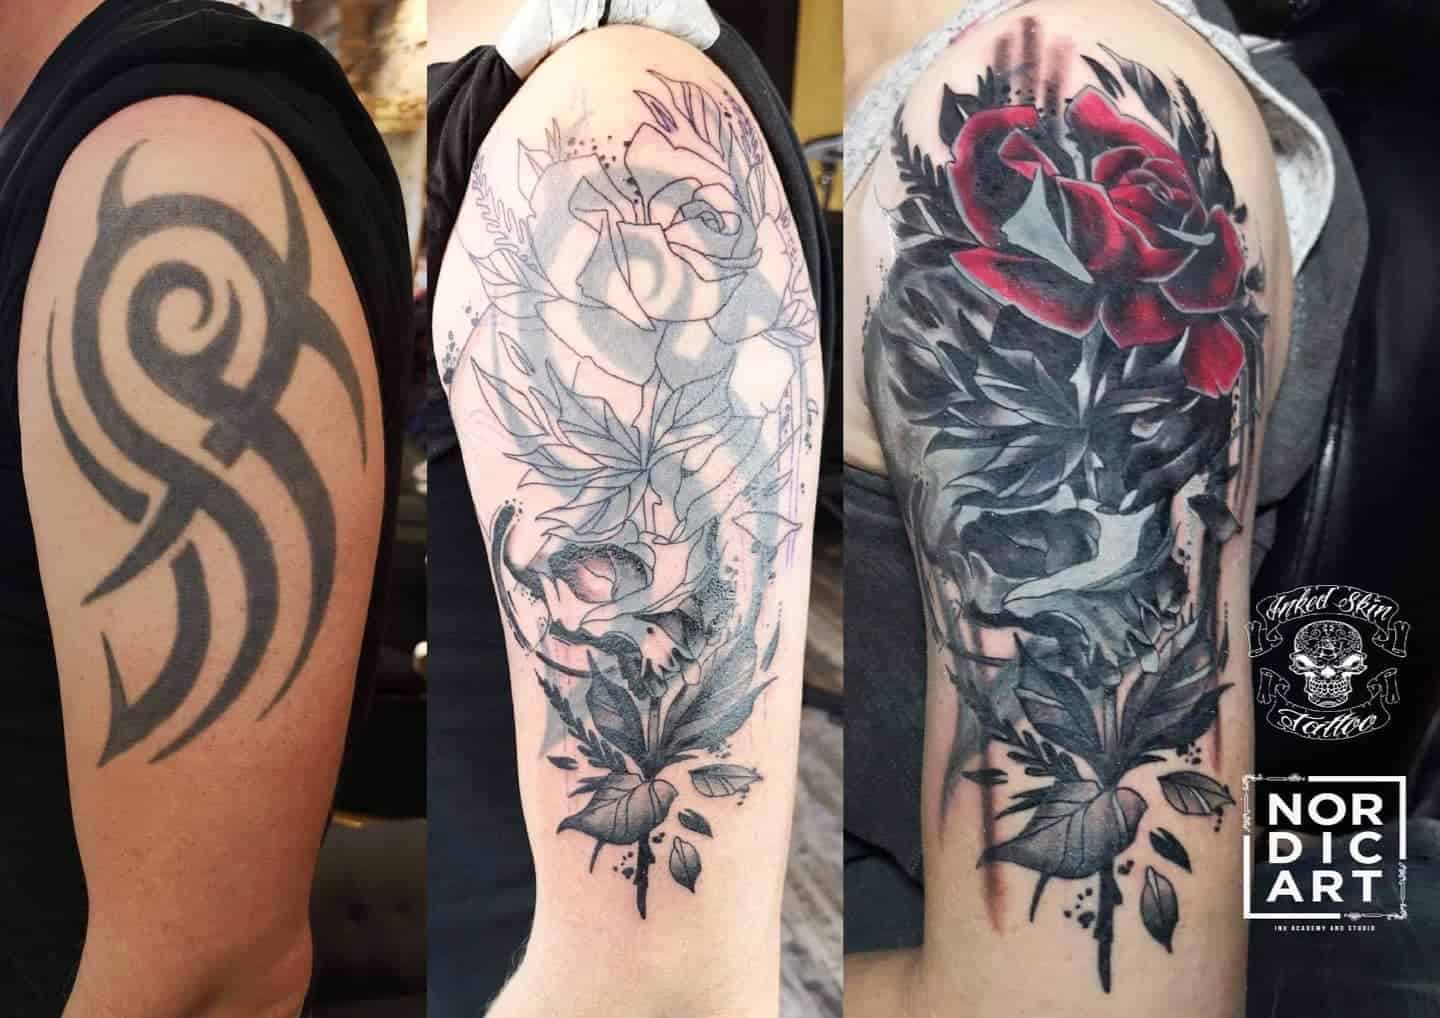 75 Best CoverUp Tattoo Designs And Ideas For Men  Women